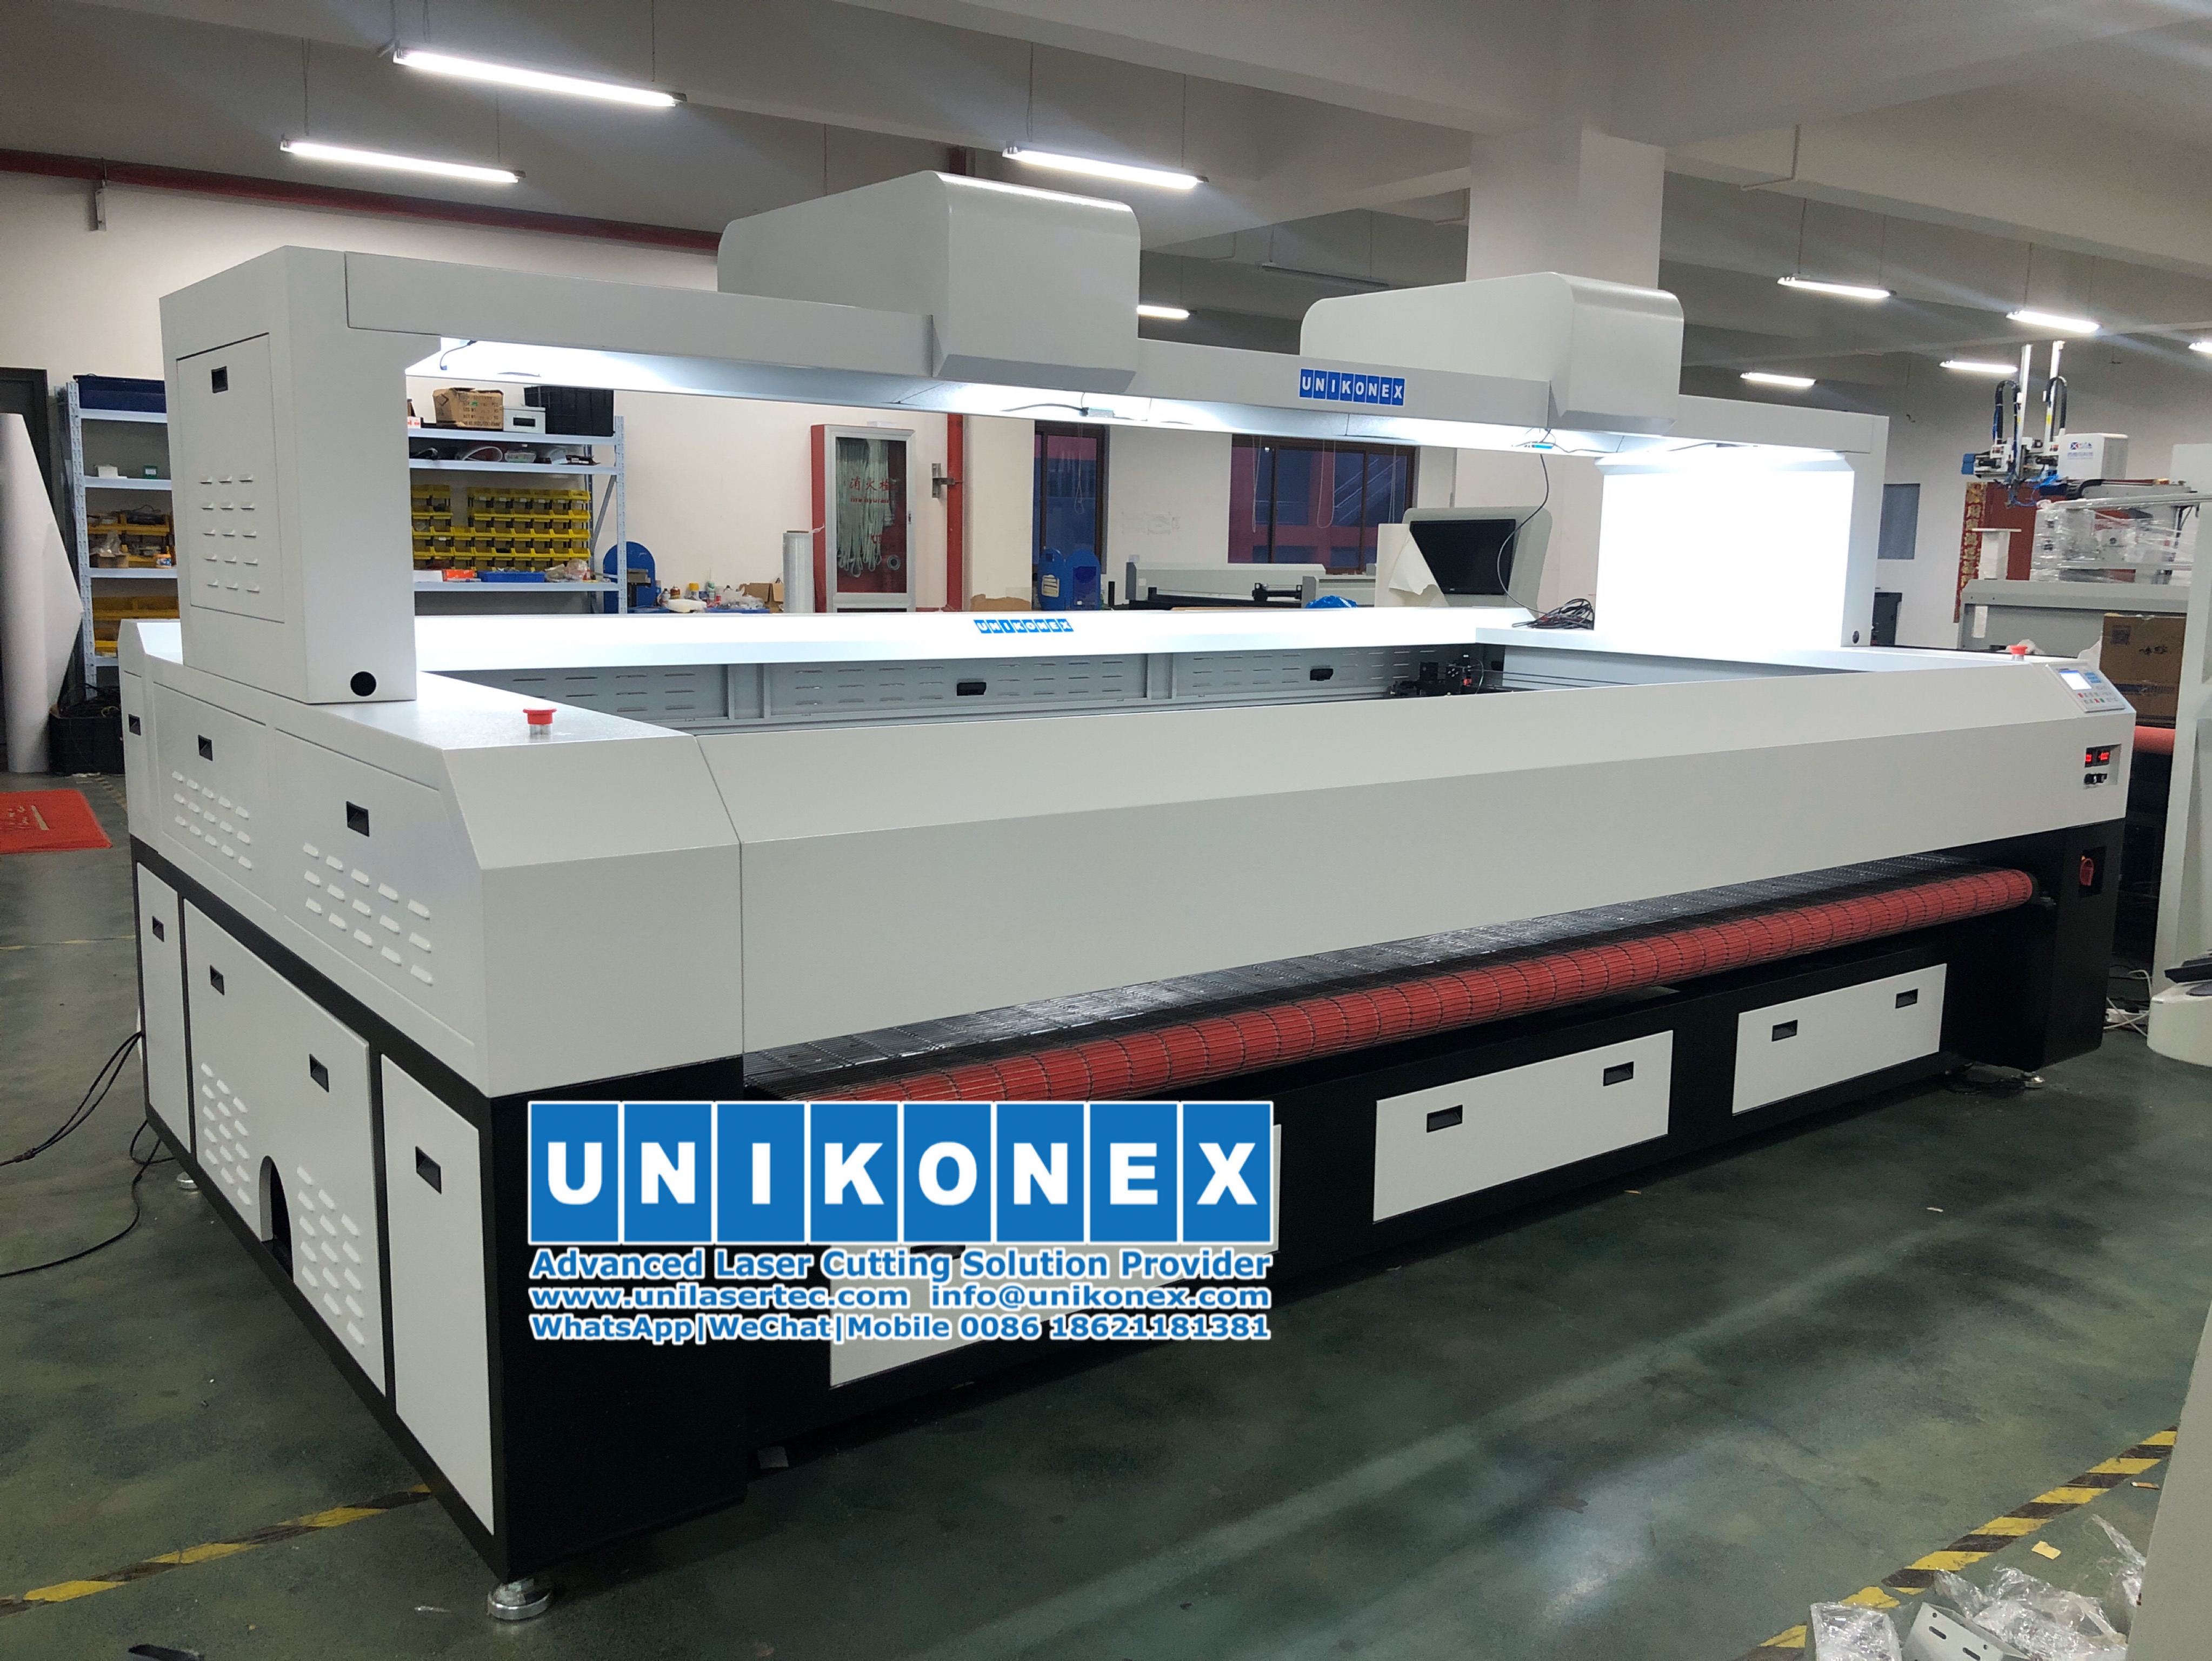 UL-VD320150 large format flag and banner laser cutting system 